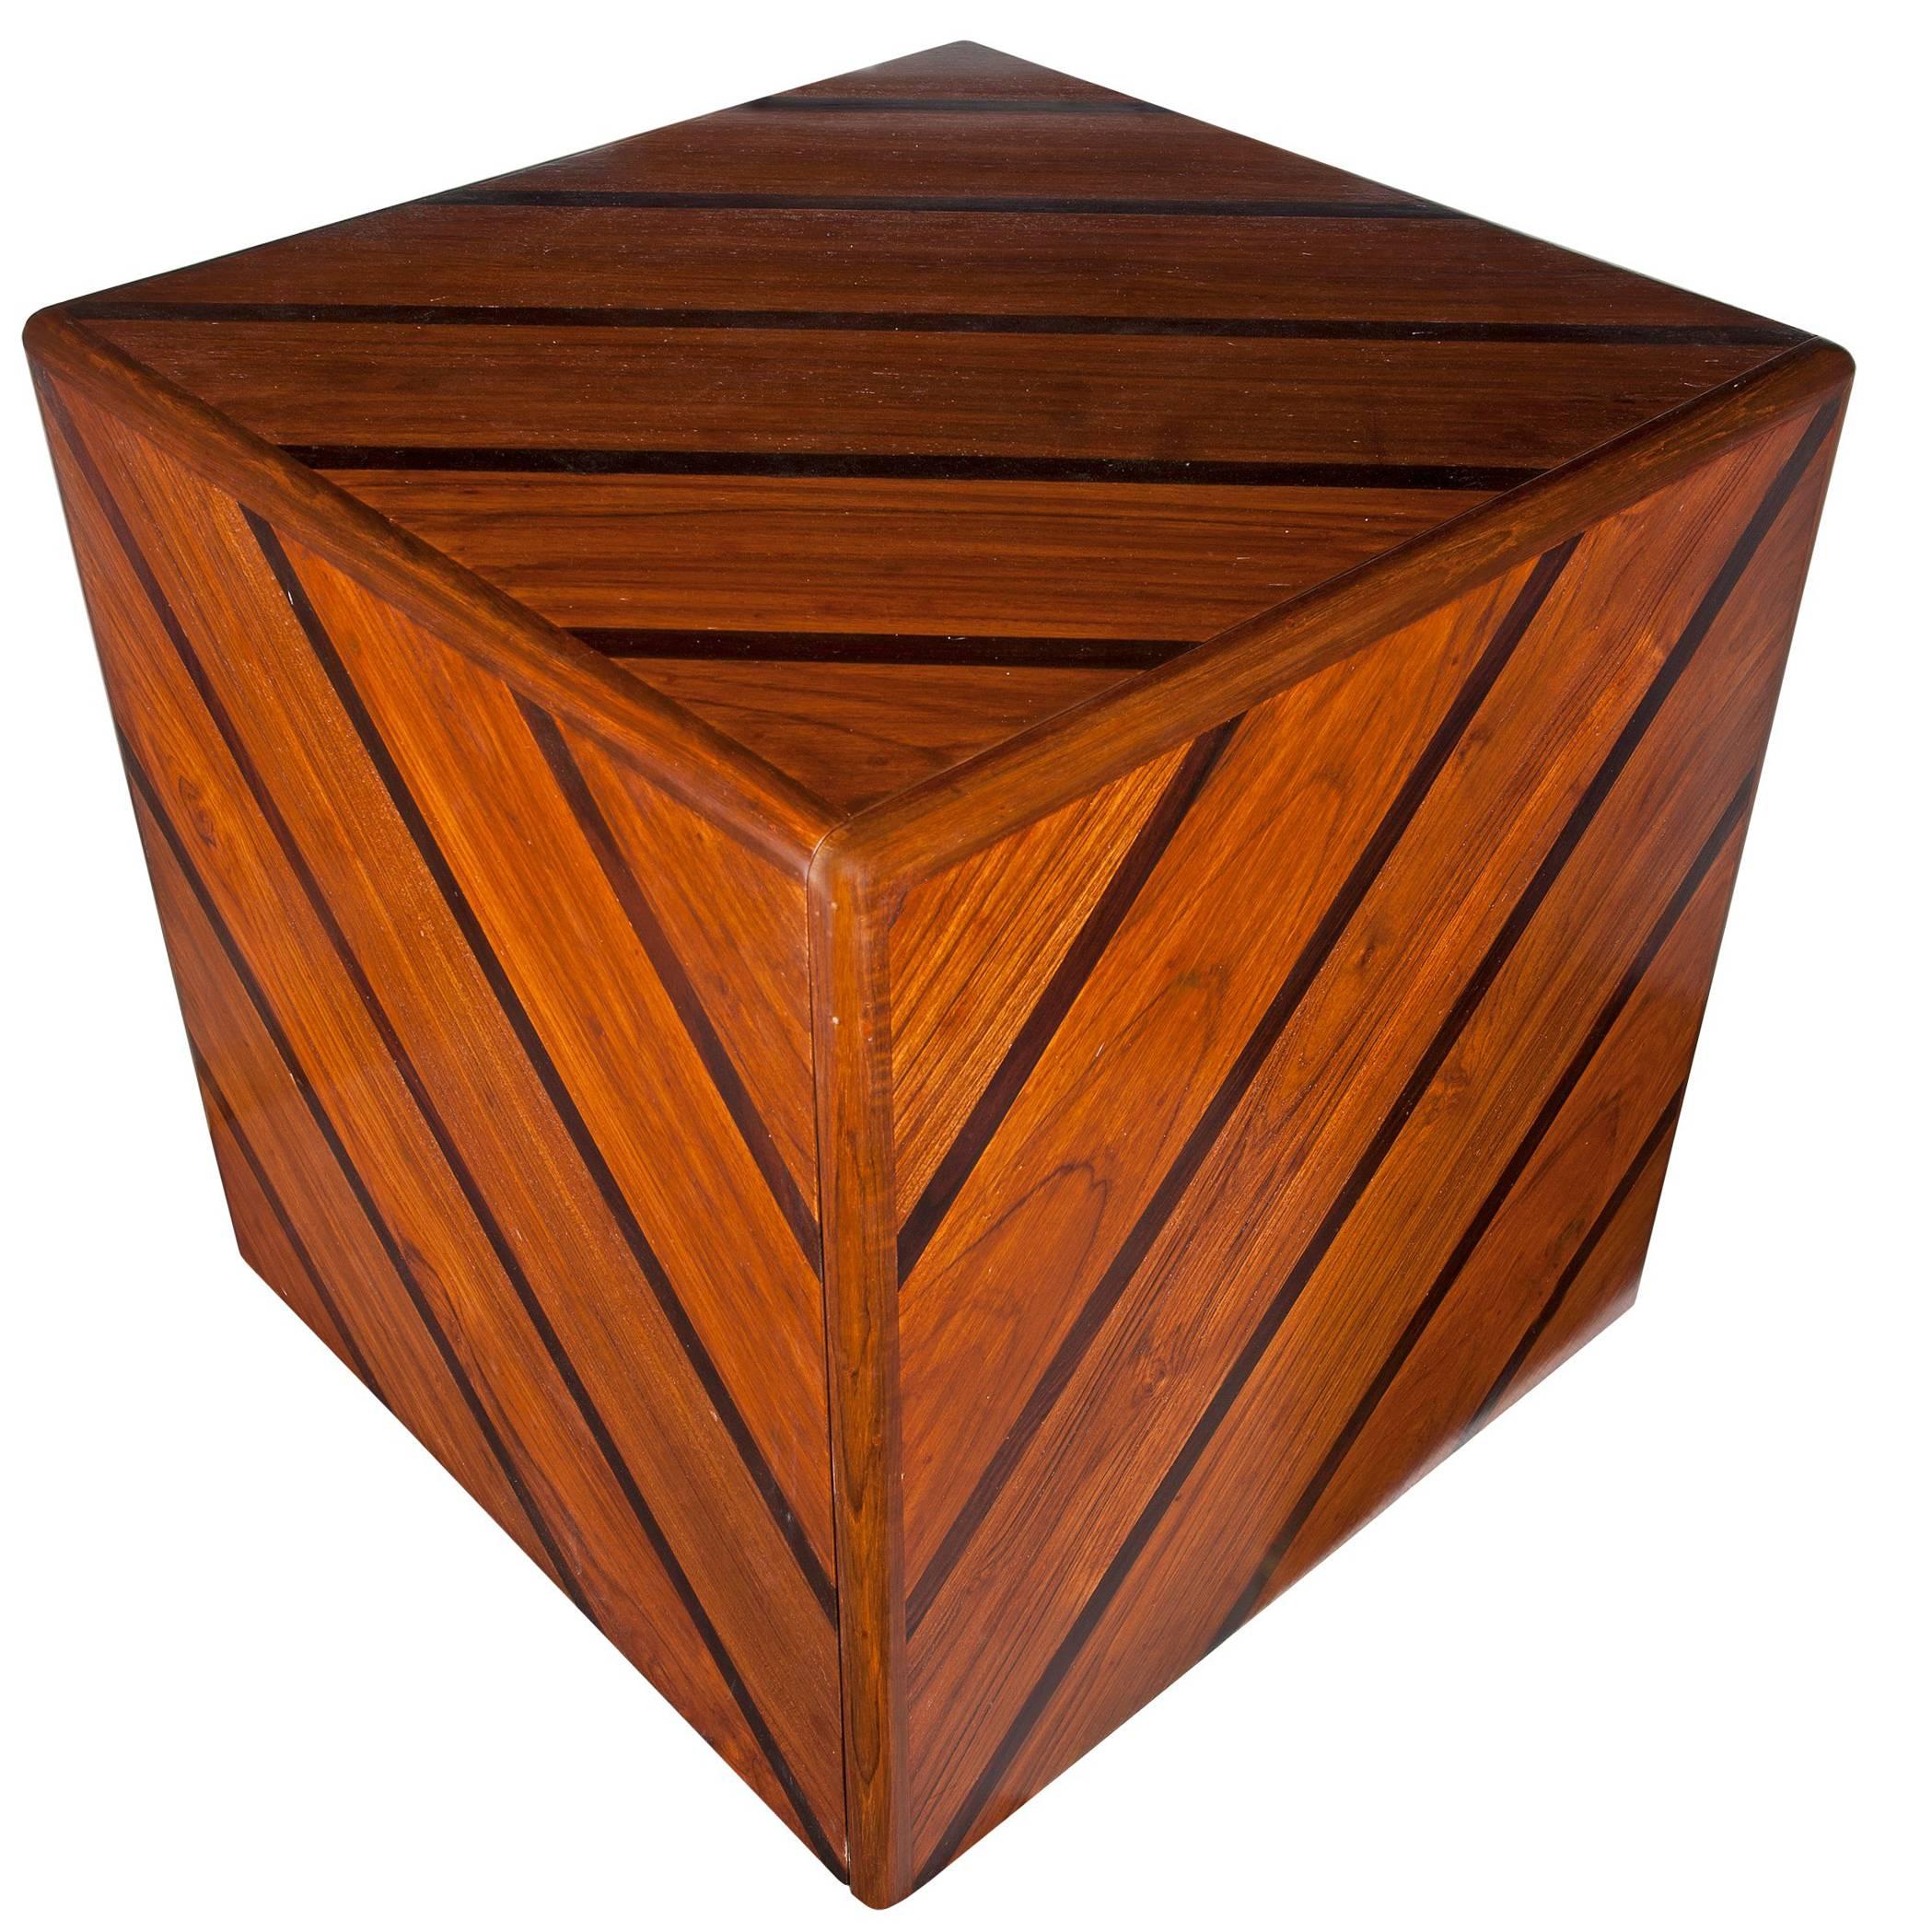 Pair of mahogany and rosewood cube side tables with hinged front door and interior shelf. Could also be used as stools. Contemporary. Designed by Deborah Lockhart Phillips. Handsome, functional, diverse and unusual.